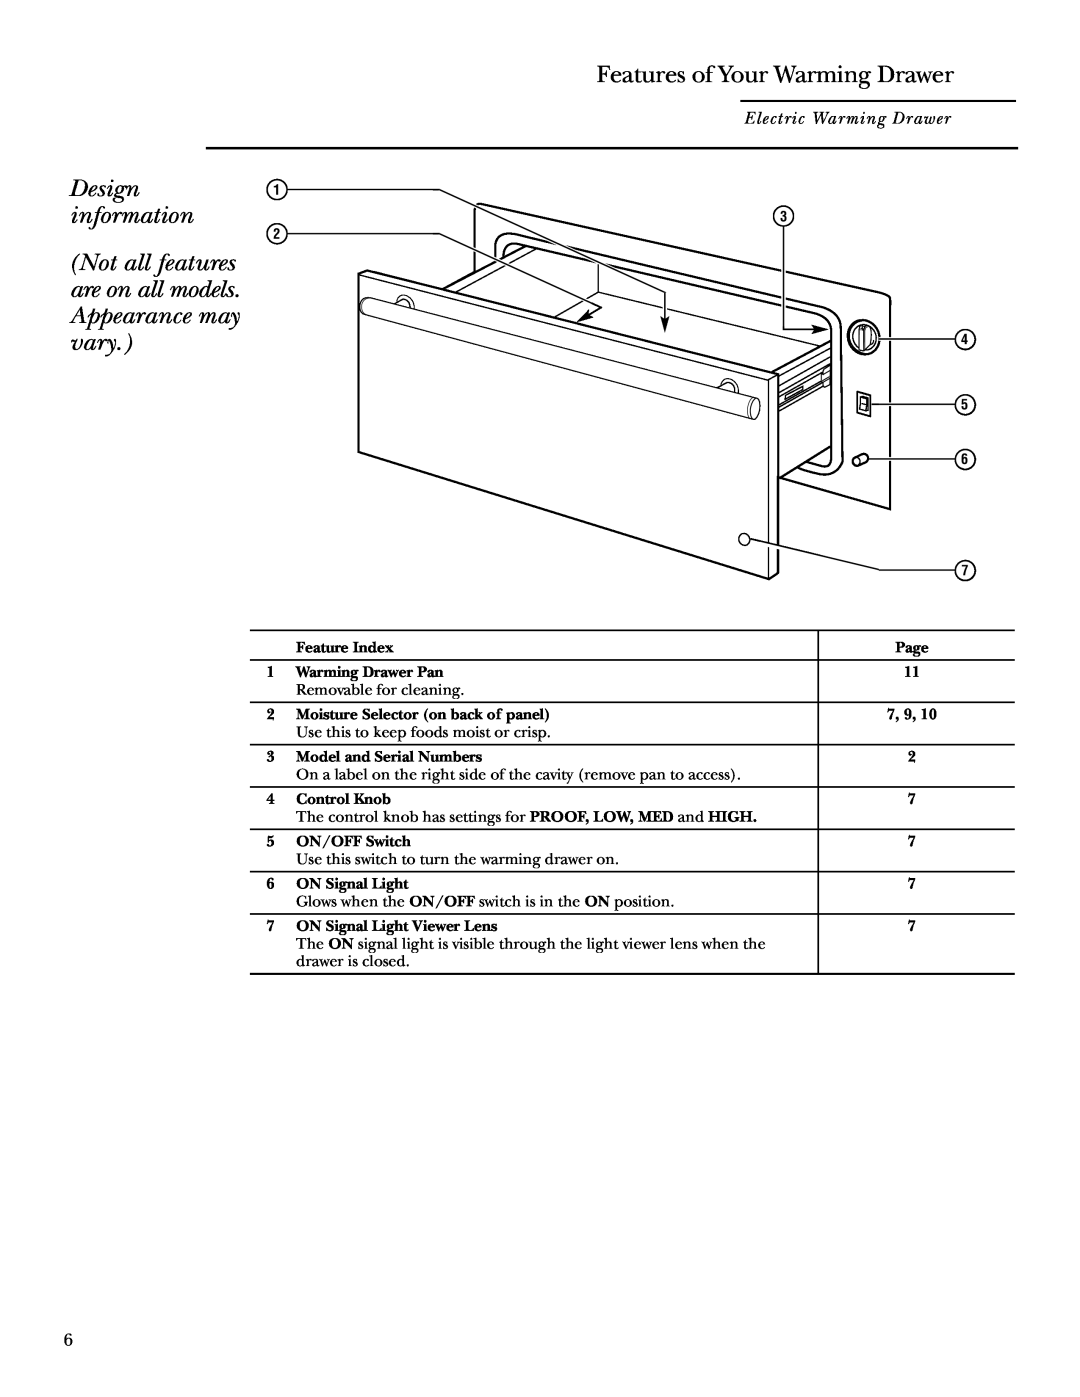 GE ZTD910 owner manual Features of Your Warming Drawer, Design information 